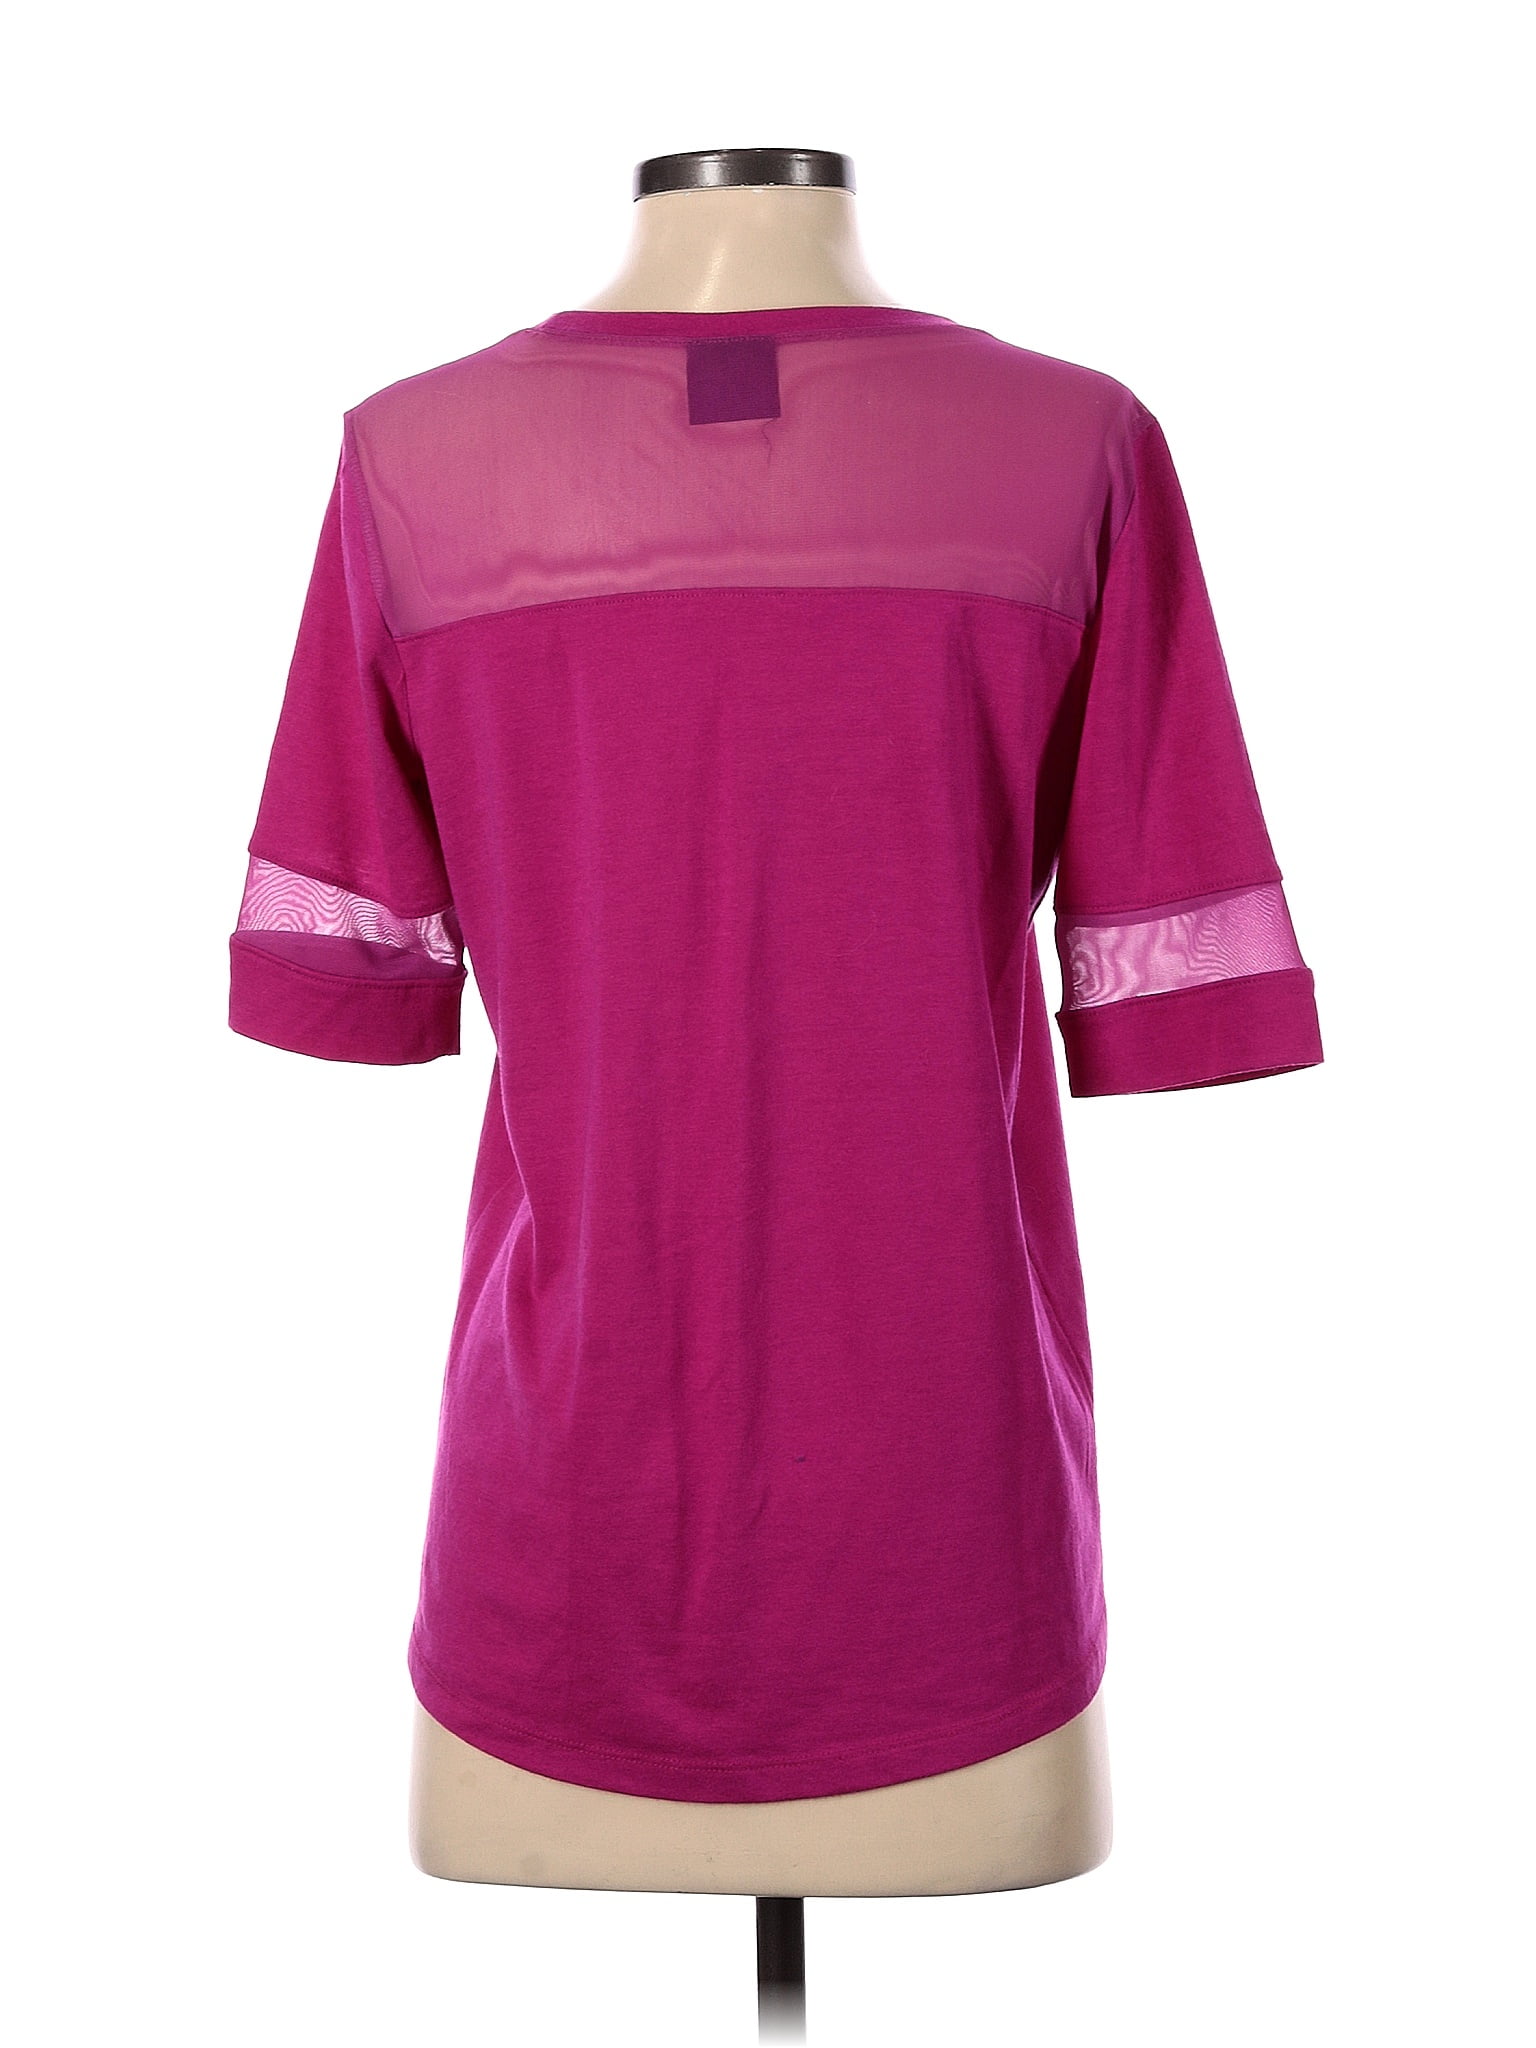 Zelos Pink Active Tank Size S - 52% off